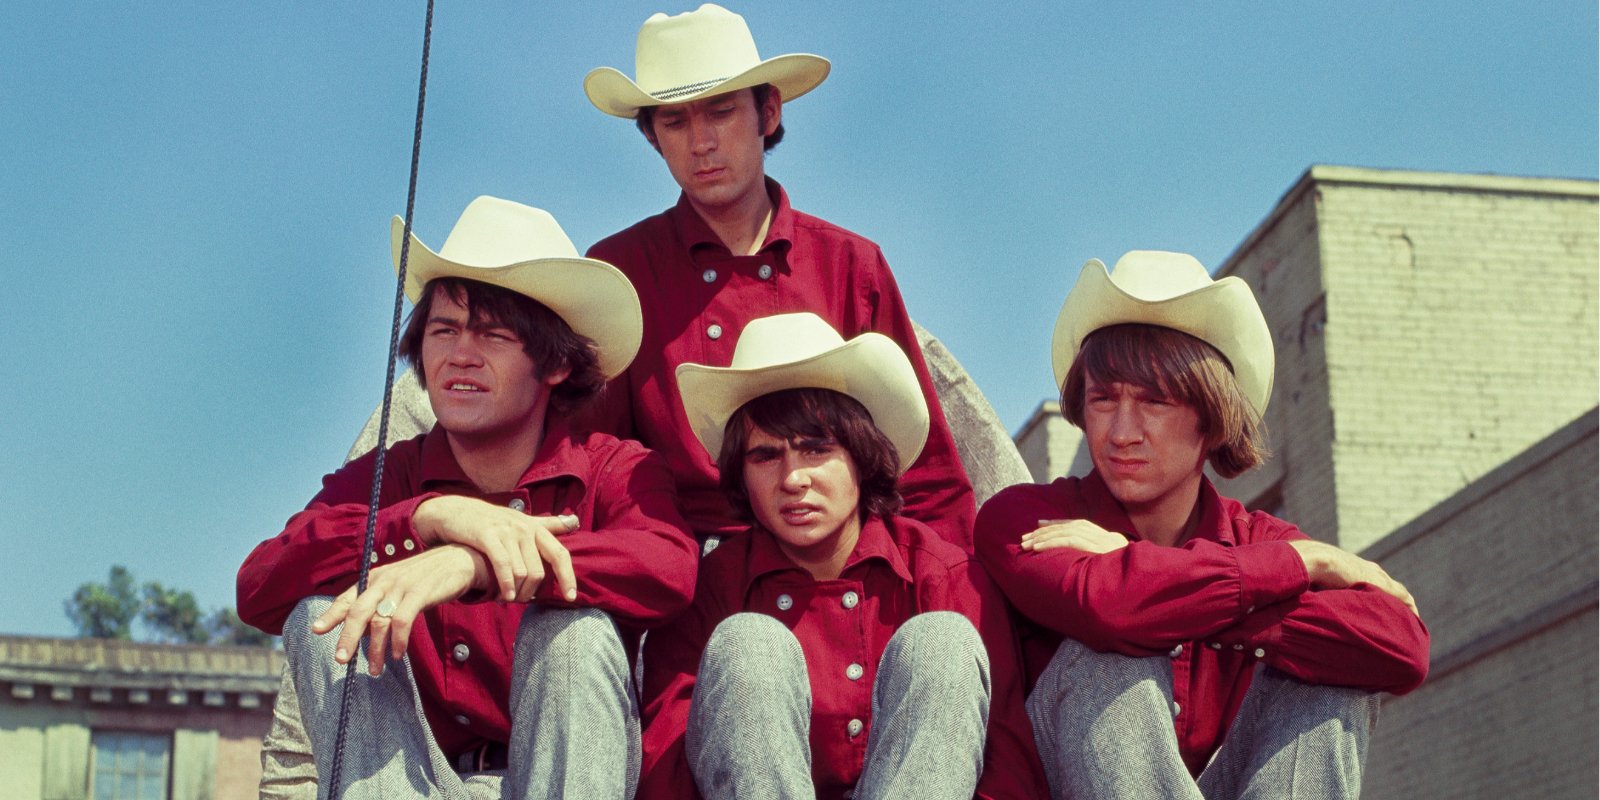 Micky Dolenz, Mike Nesmith, Davy Jones and Peter Tork on the set of 'The Monkees' television series.